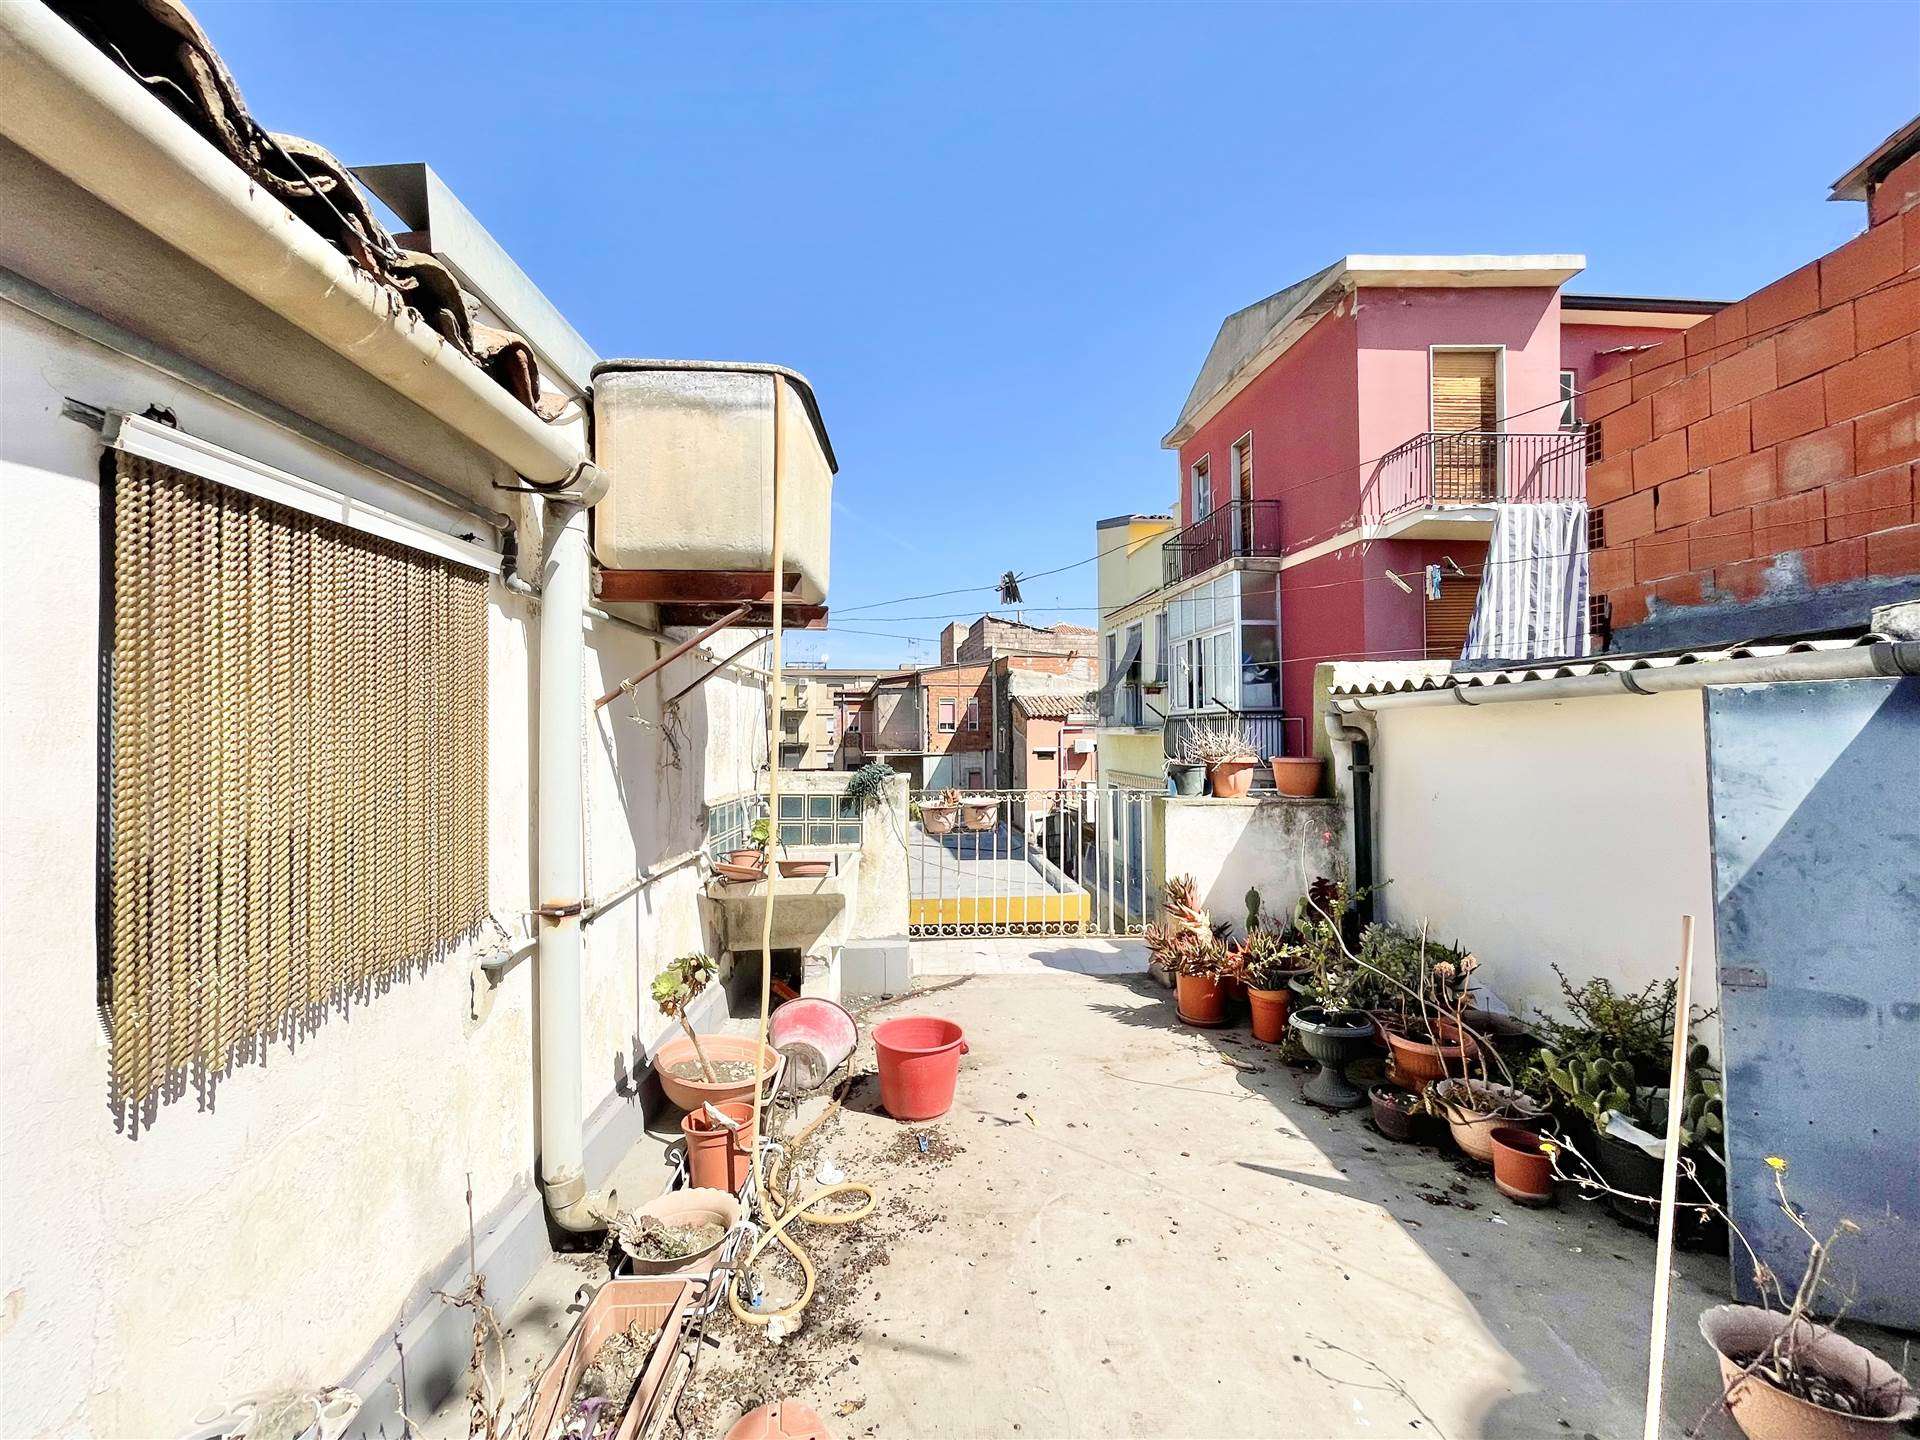 PATERNO', Single house for sale of 65 Sq. mt., Be restored, Heating Individual heating system, Energetic class: G, placed at 1° on 2, composed by: 2 